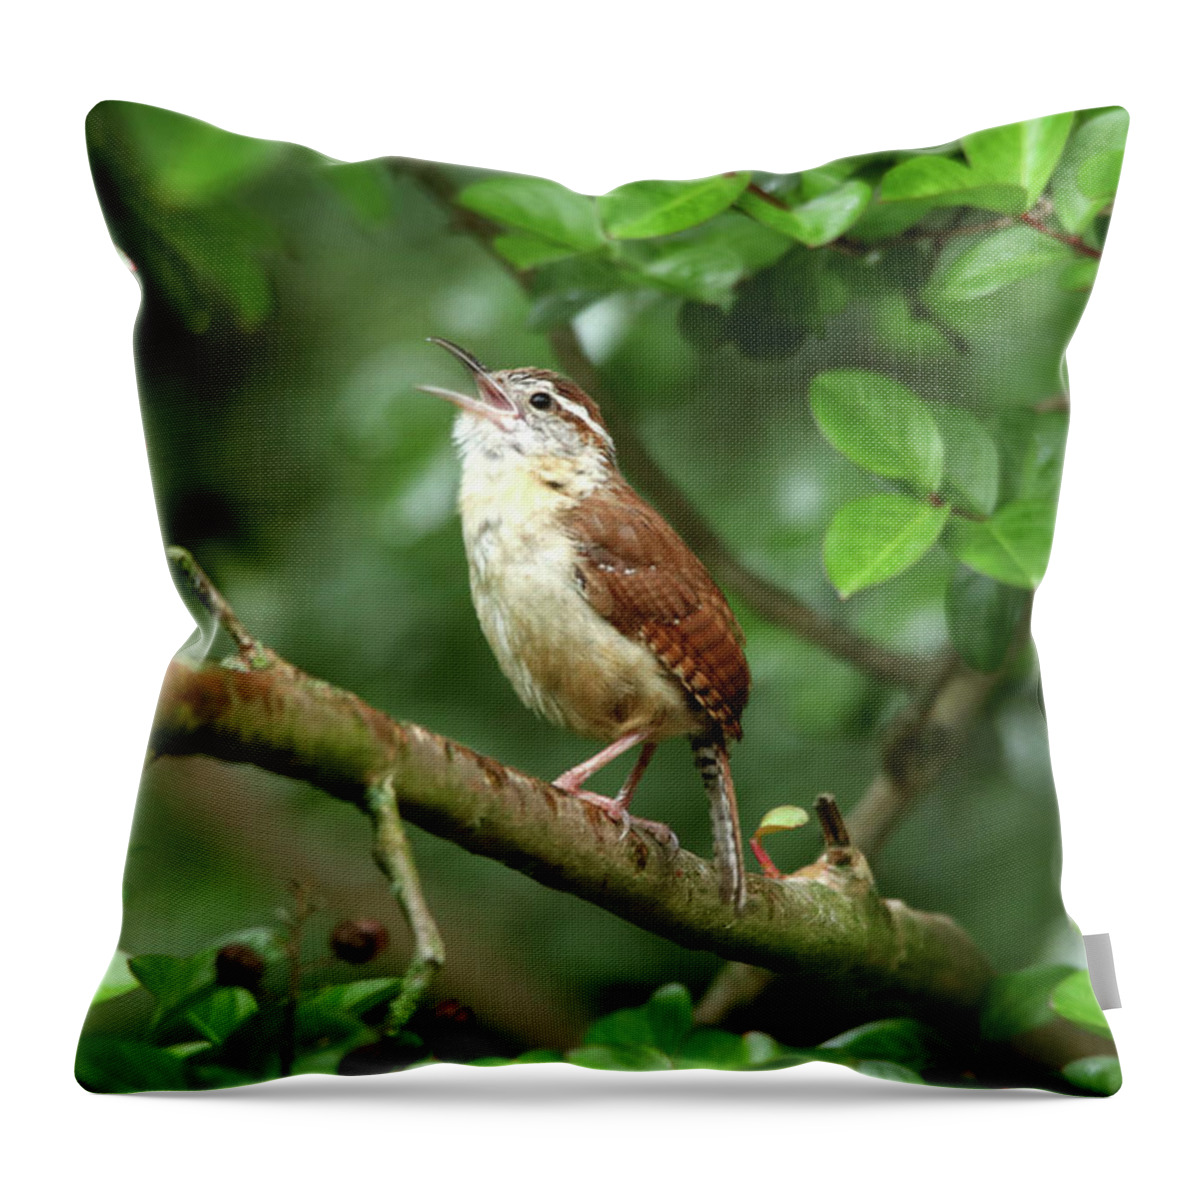 Birds Throw Pillow featuring the photograph The Little Singing Wren by Trina Ansel